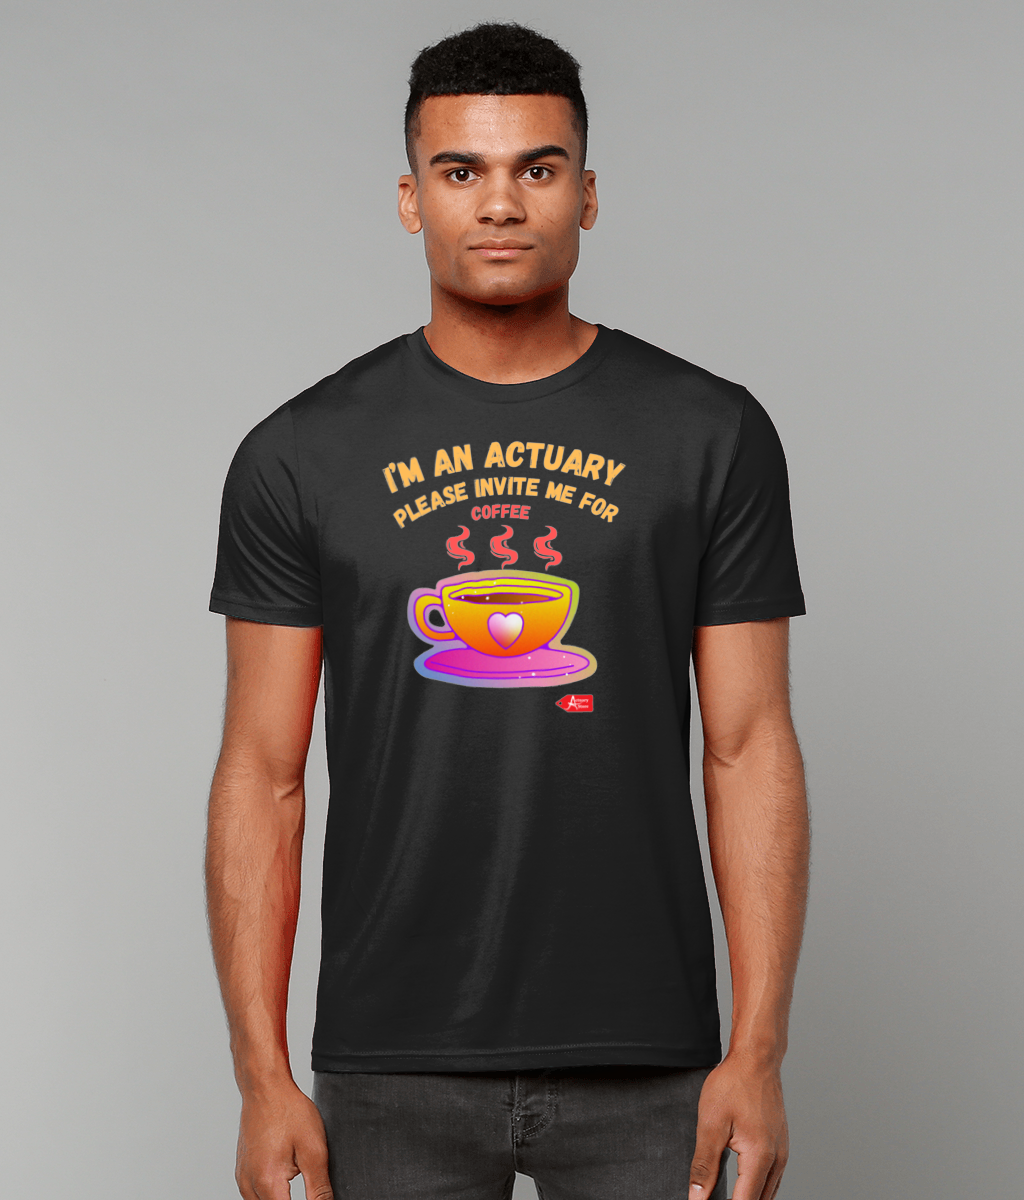 I'm An Actuary Please Invite Me for Coffee T-shirt (Black and White Variants)